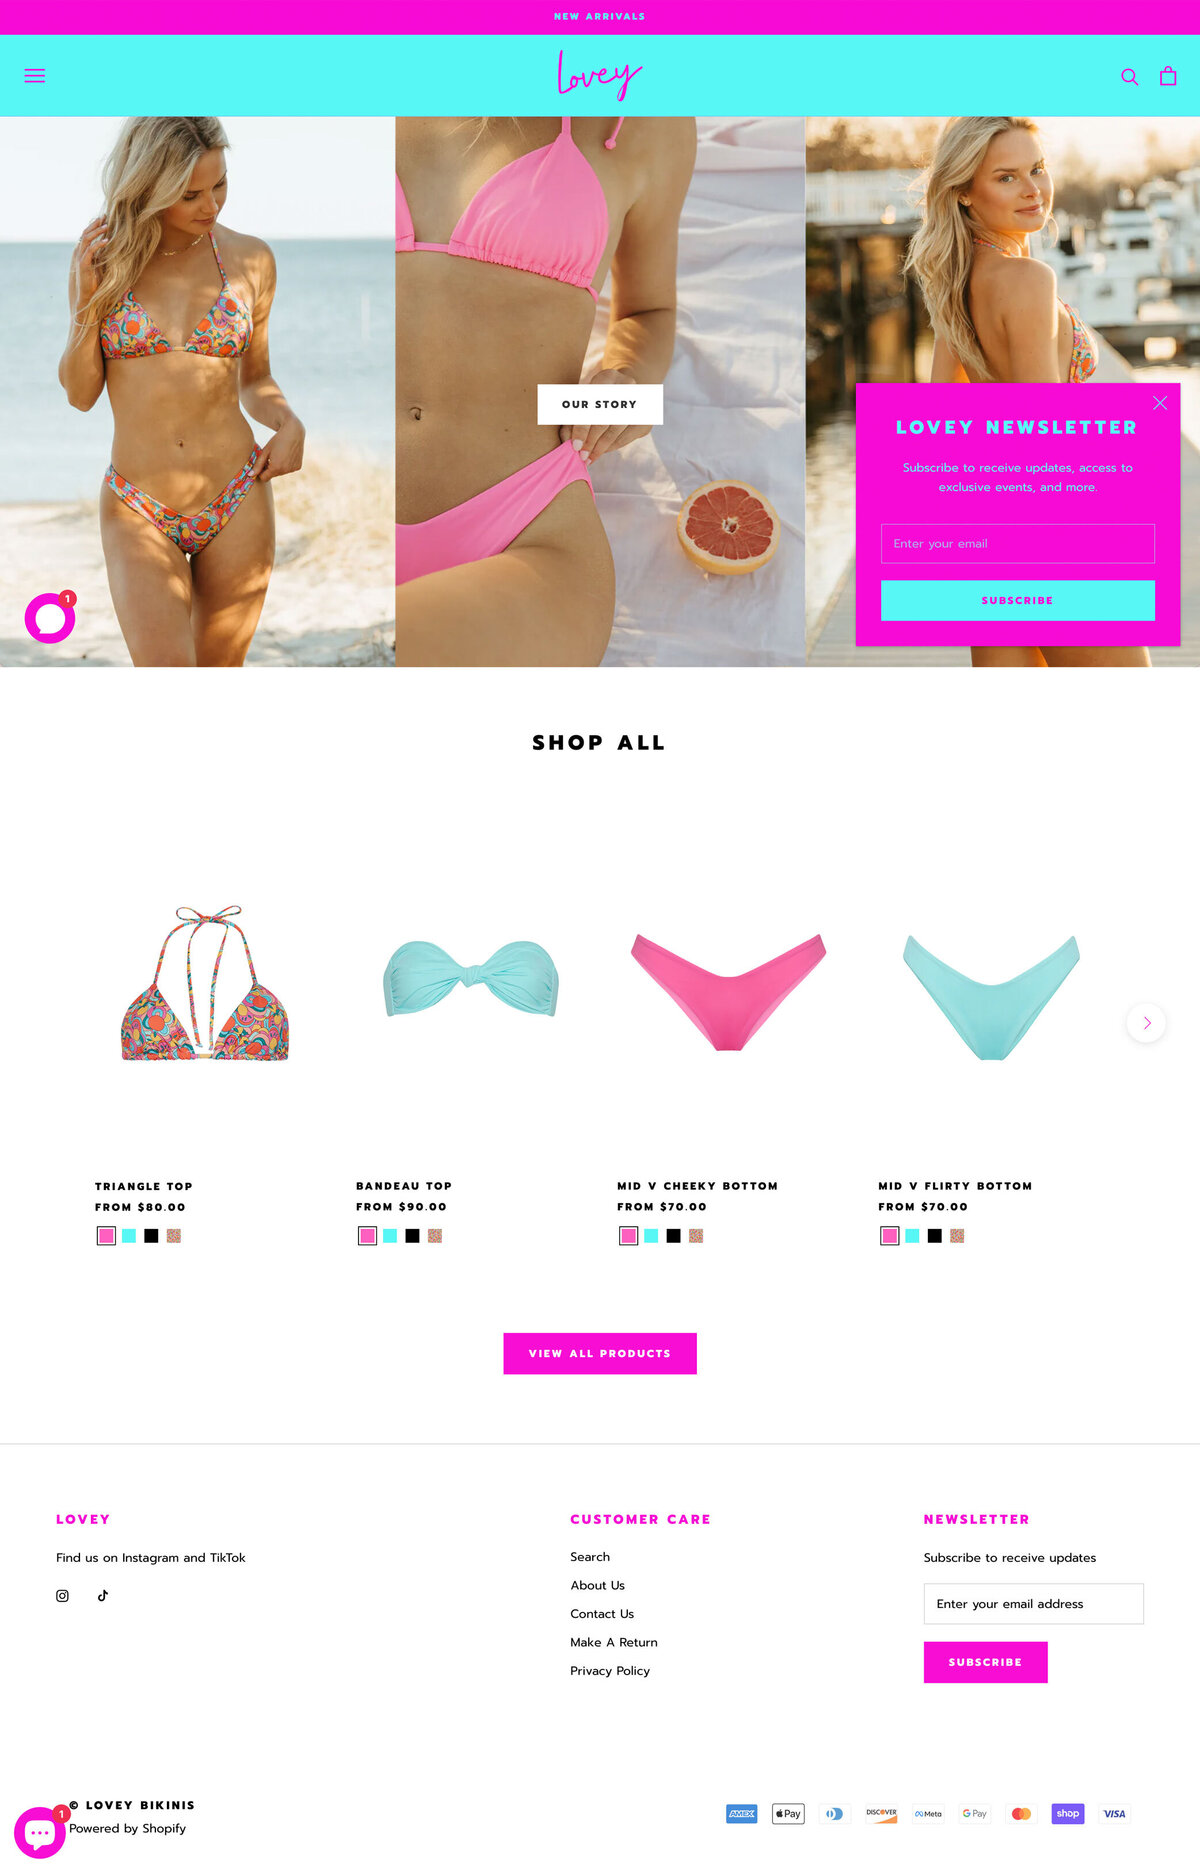 Homepage design of Lovey website with neon blue and pink color details